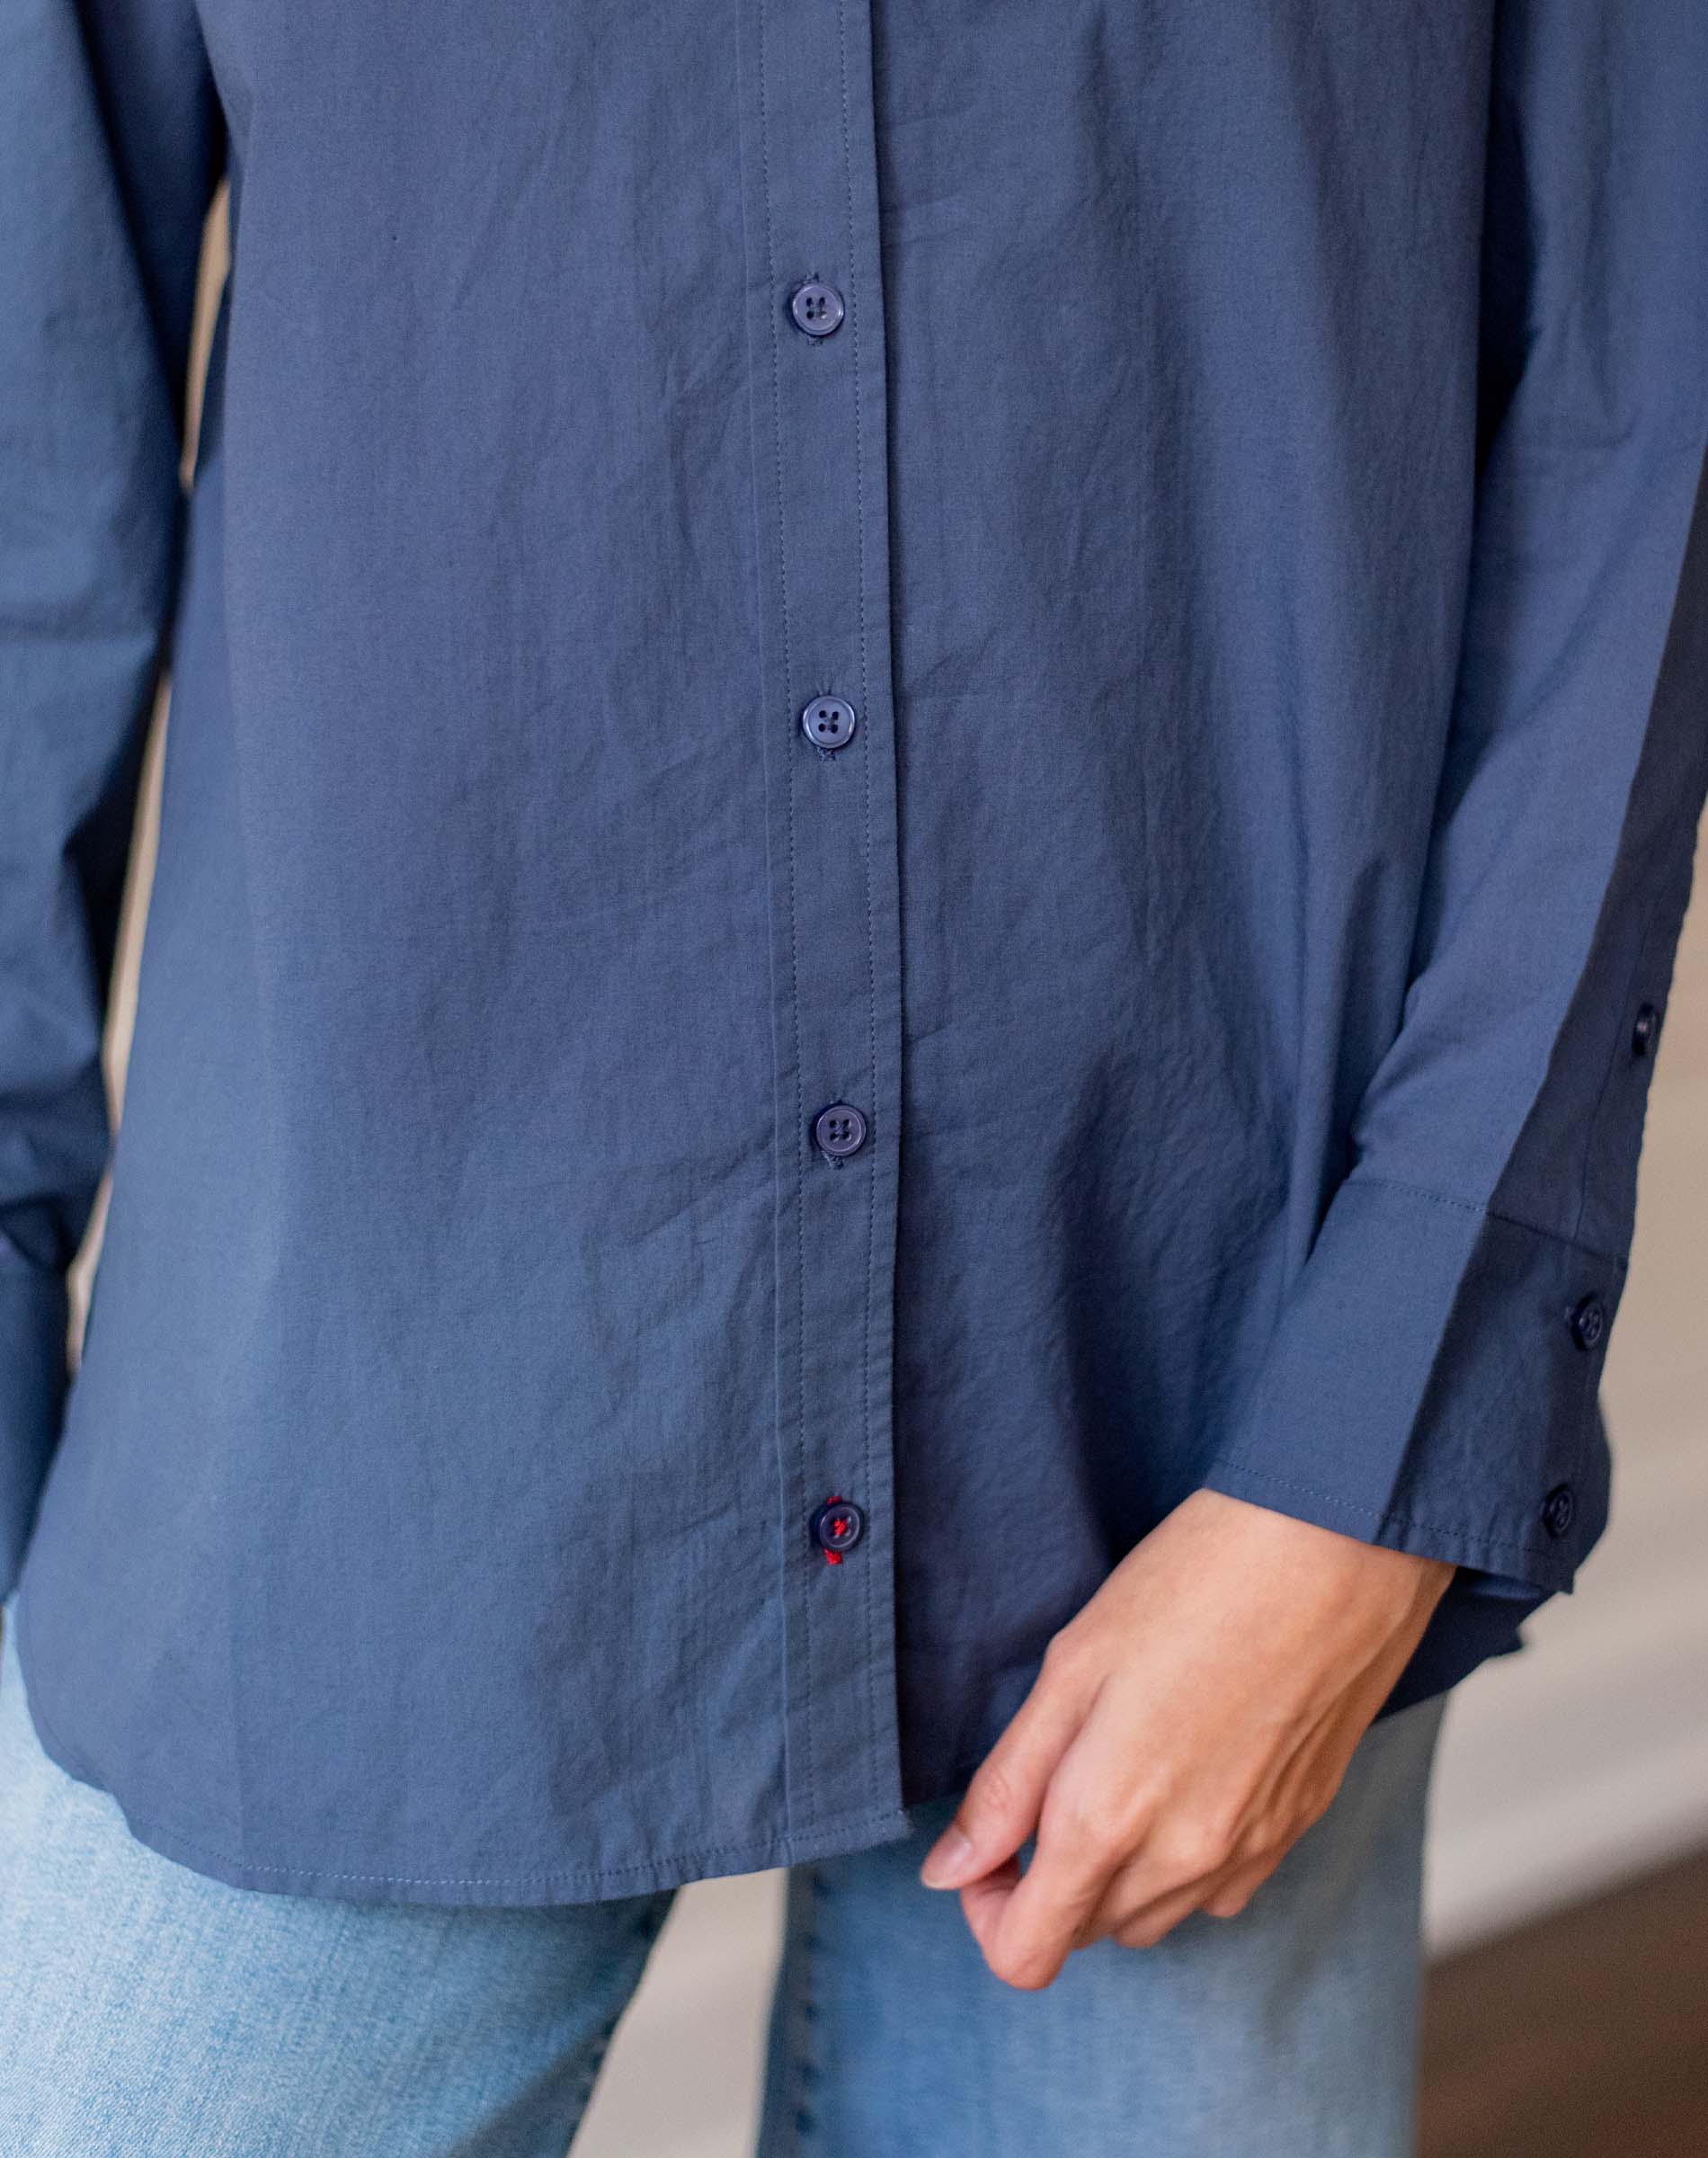 Women's Navy Blue Breathable Relaxed Fit Button Up Shirt Close Up Front View Detail Buttons